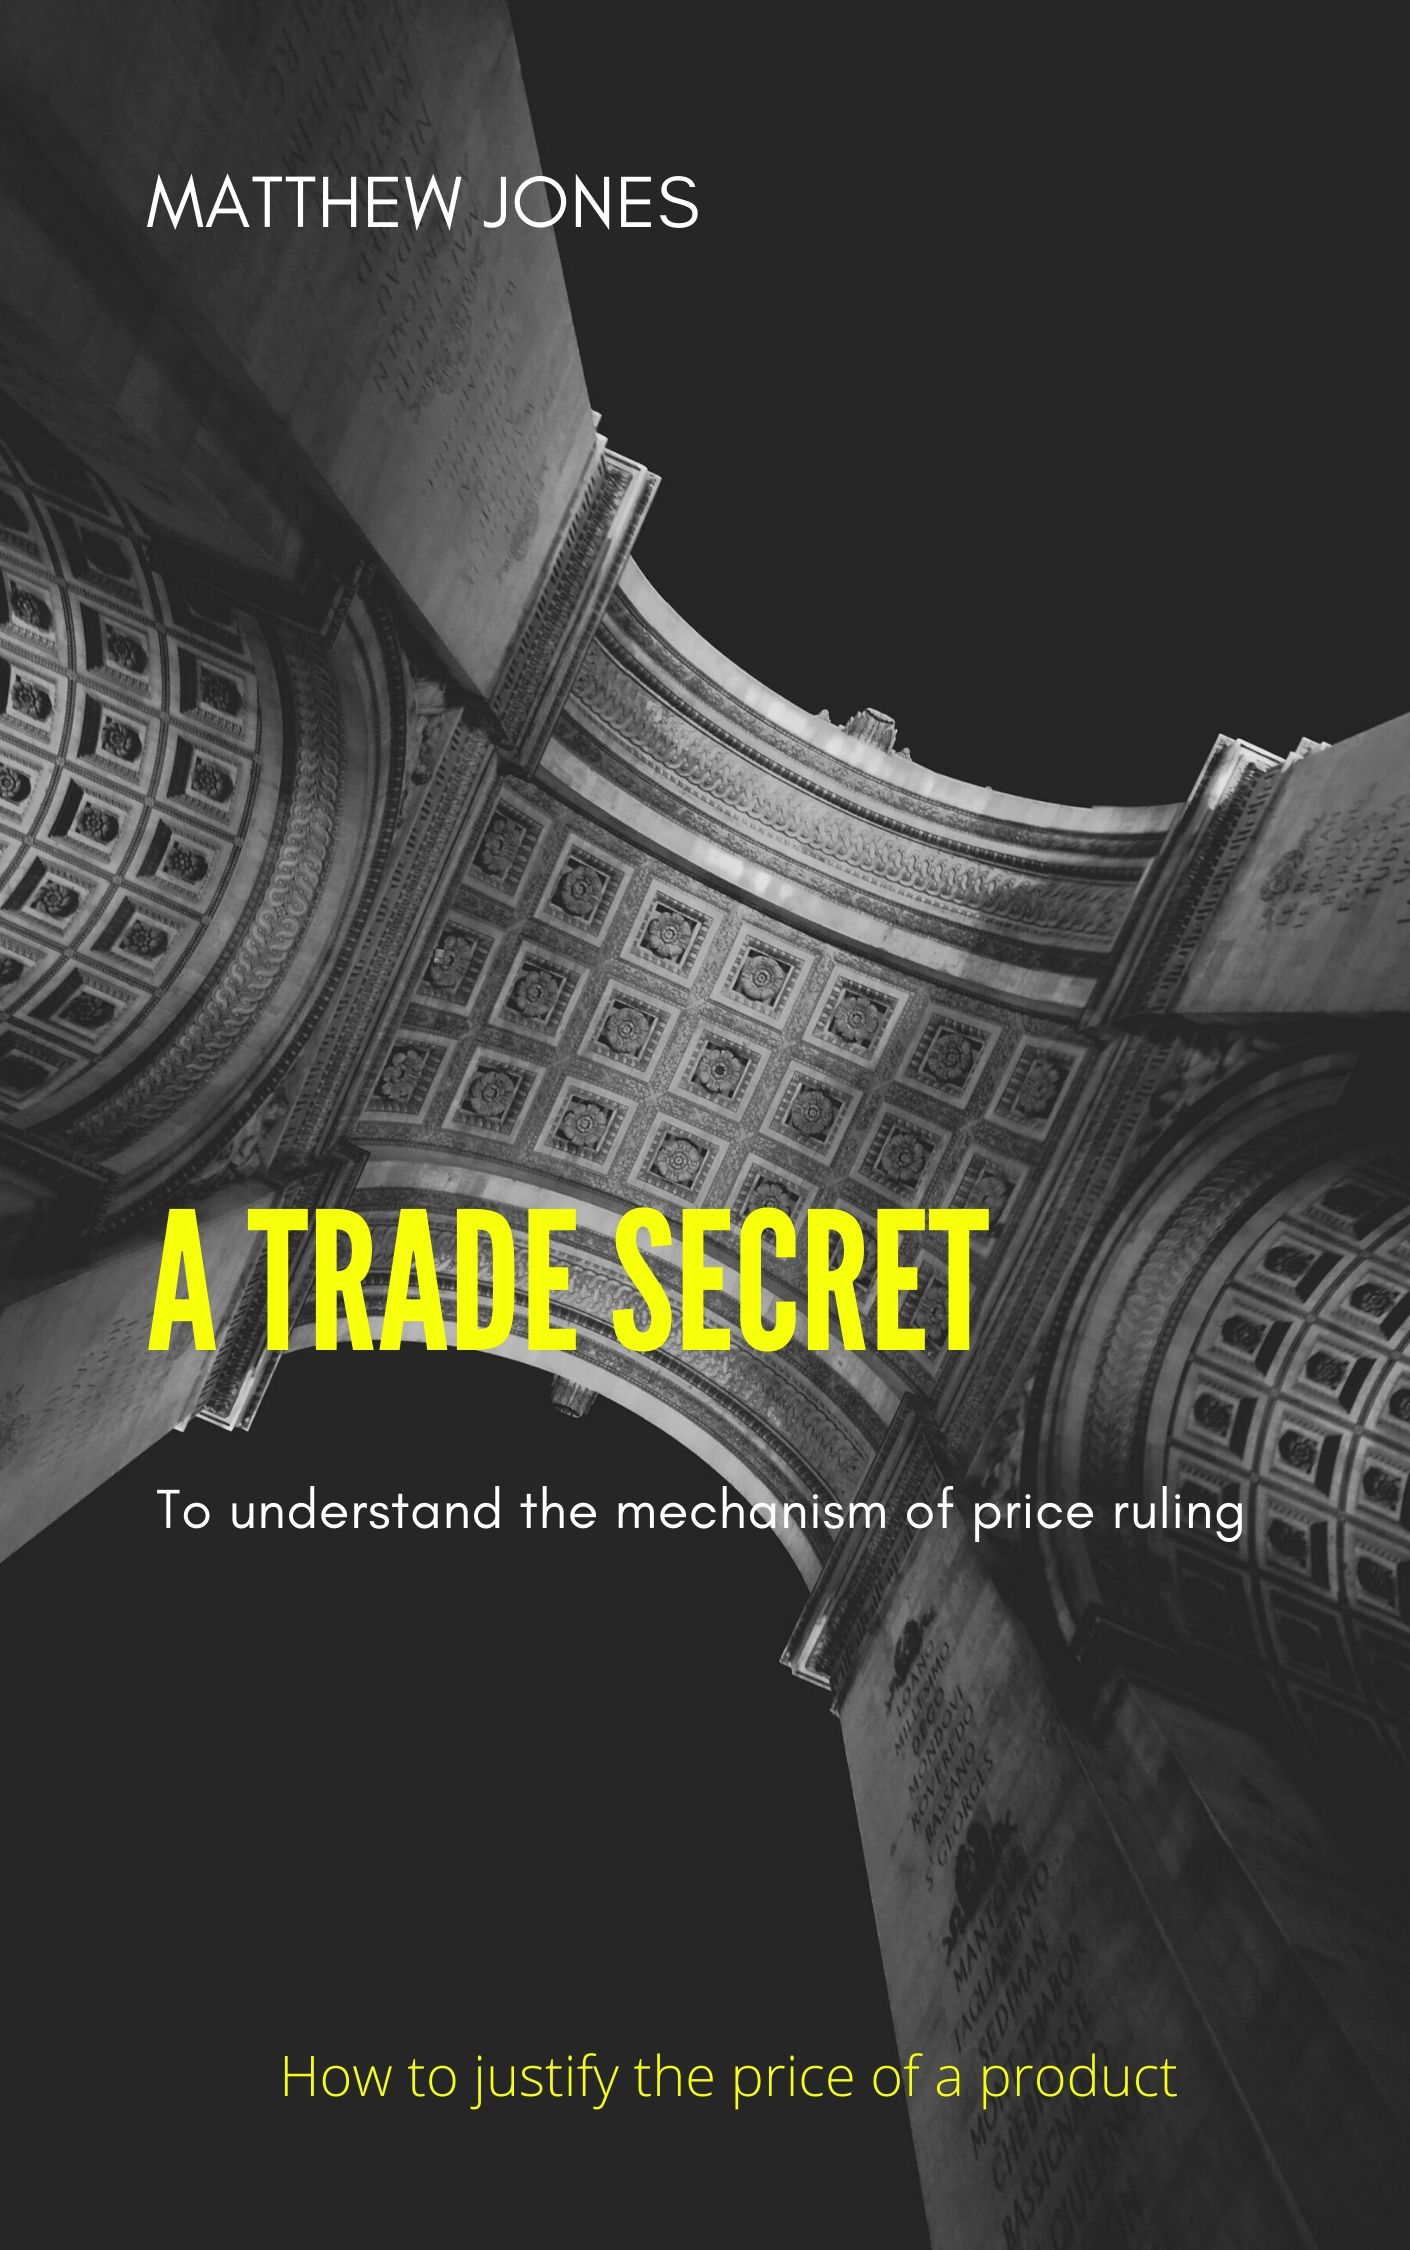 FREE: A trade secret: To understand the mechanism of price ruling. How to justify the price of a product? by Matthew Jones